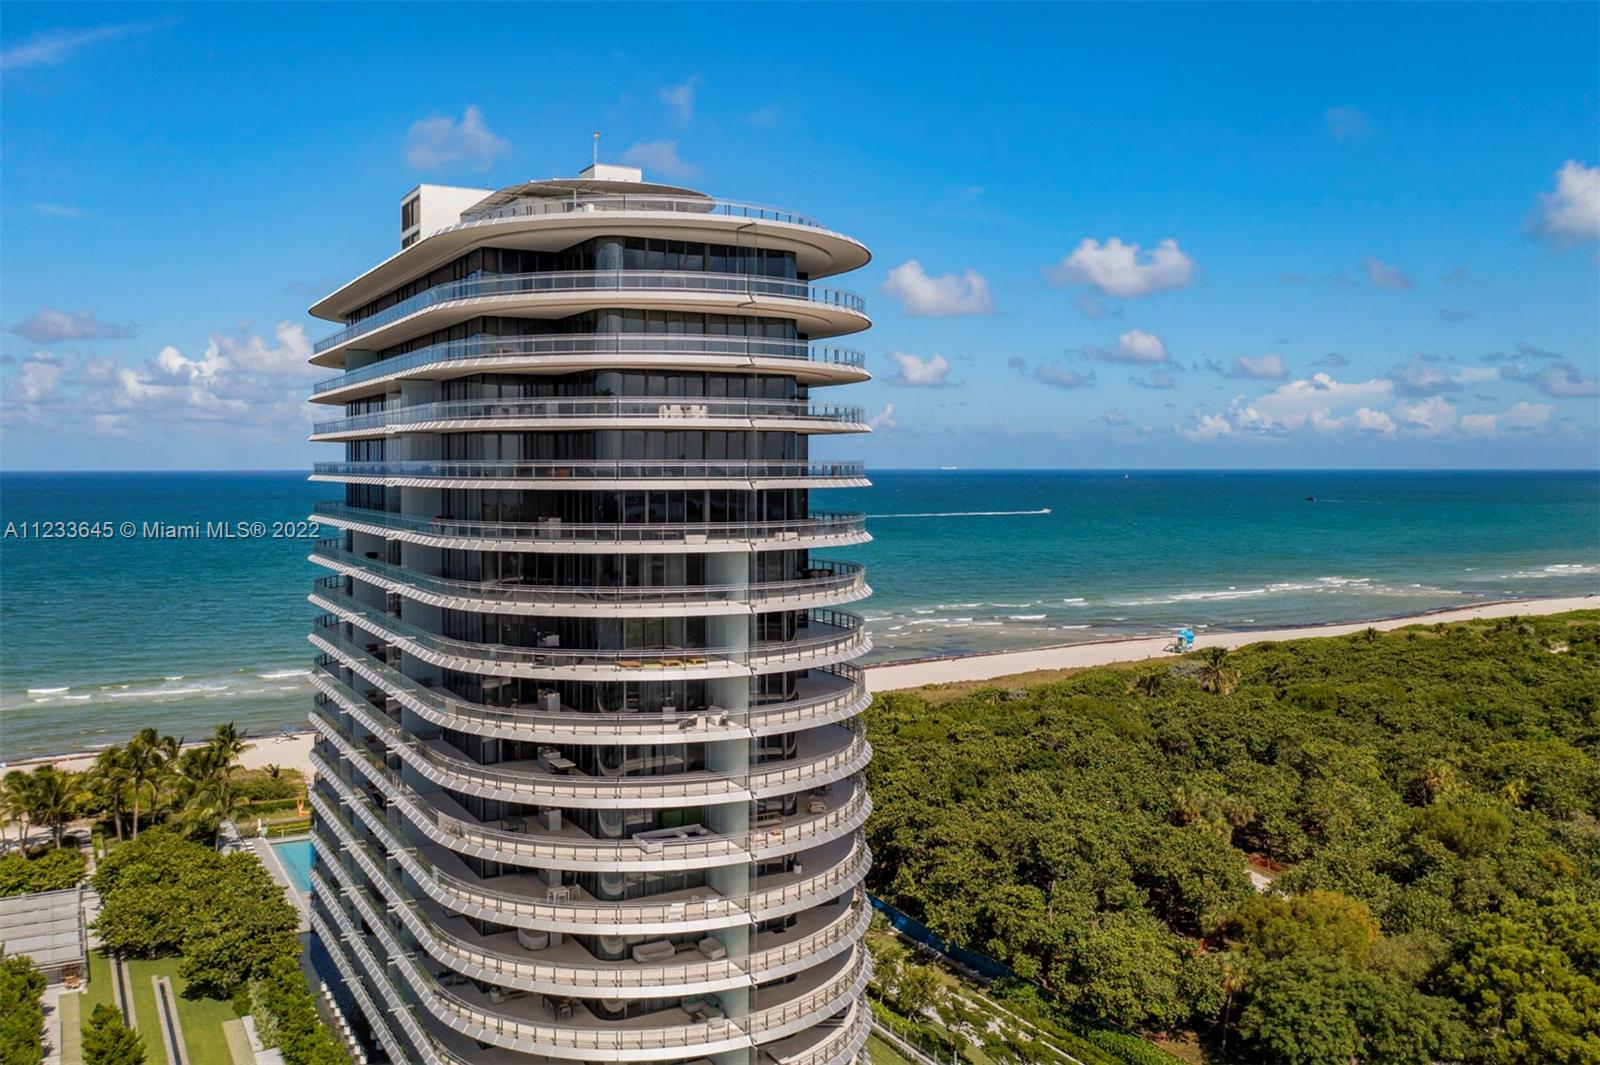 One of Miami Beach's most unique buildings, Eighty Seven Park, was designed by renowned architect Renzo Piano Building Workshop. Enjoy resort-style living in this tranquil space overlooking Biscayne Bay and Miami skyline views to the West and the endless Atlantic Ocean to the East. This corner unit features high-end finishes, floor-to-ceiling walls of glass, and stacking glass doors which create a seamless indoor/outdoor living space on the 1,433 square foot terrace. Interior features, such as a private elevator entrance, chef's kitchen, Subzero and Wolf appliances, and custom D & C Italia closets with LED lights. The building features 5-star services including a full-service spa and hammam, hair salon, board room, 2 pools and beach service, FUGO restaurant, Enoteca Wine Bar, and more.